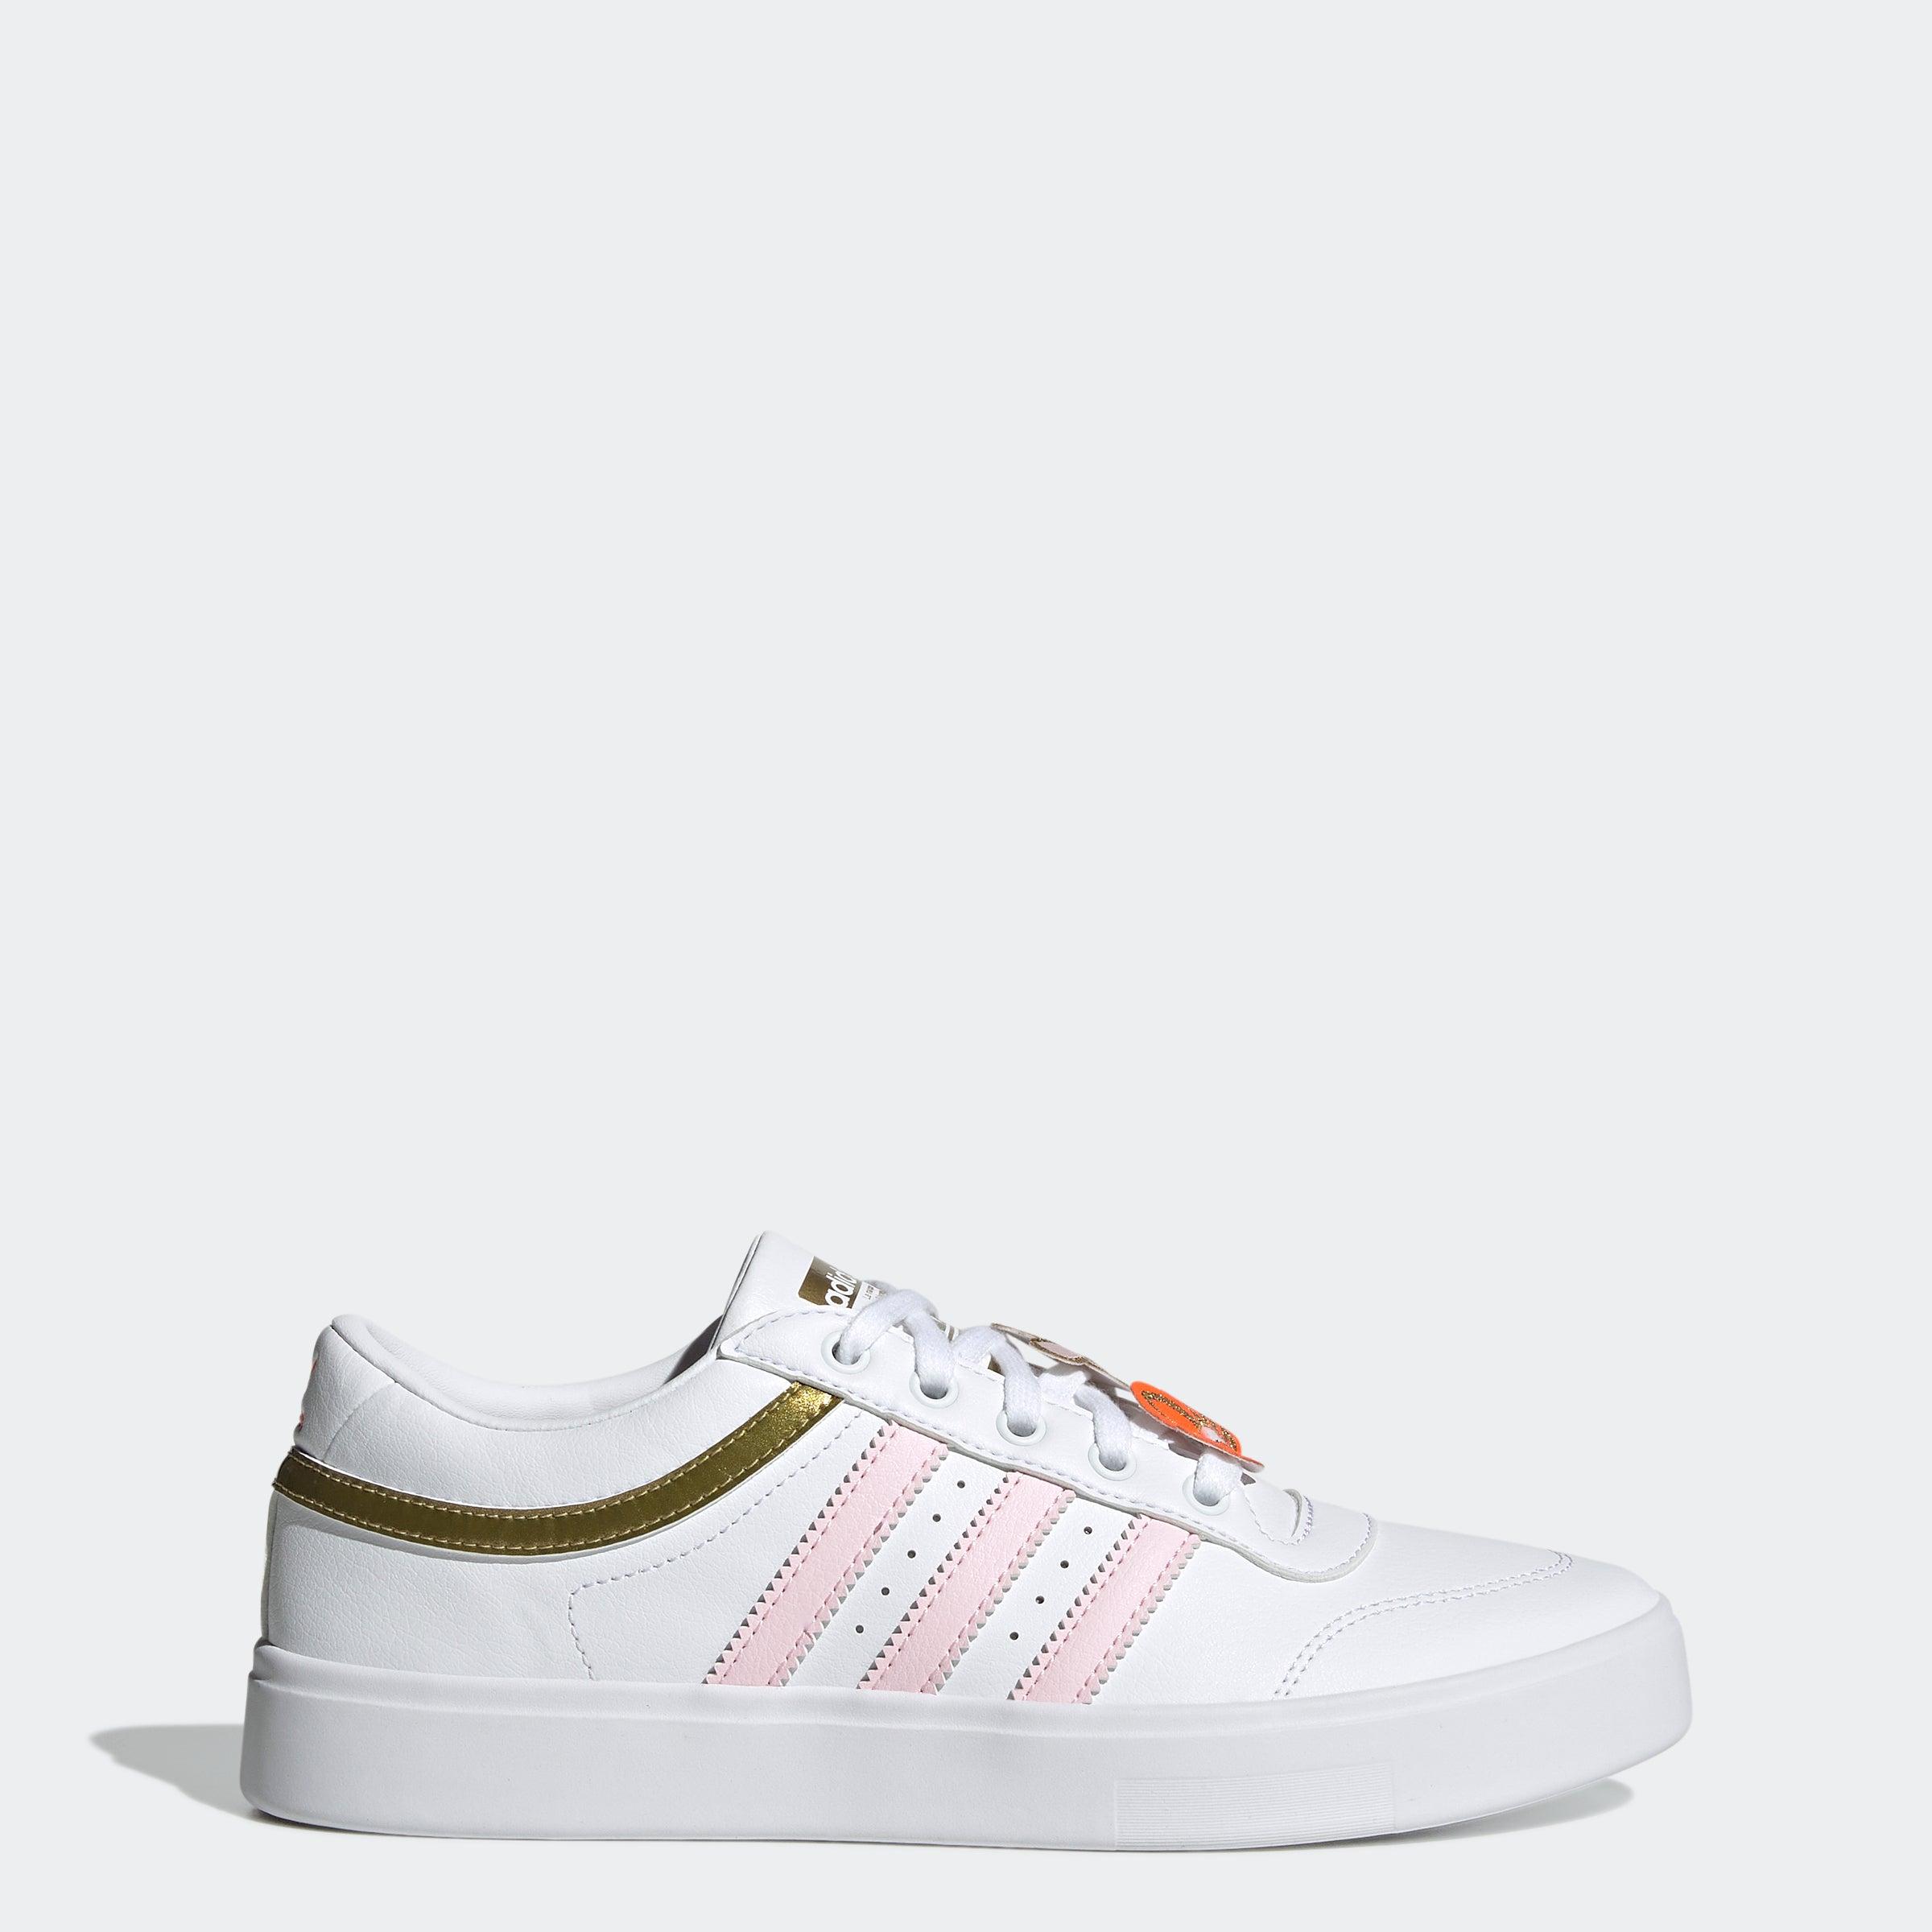 Menagerry dood gaan Plasticiteit adidas Bryony Shoes in White | Lyst